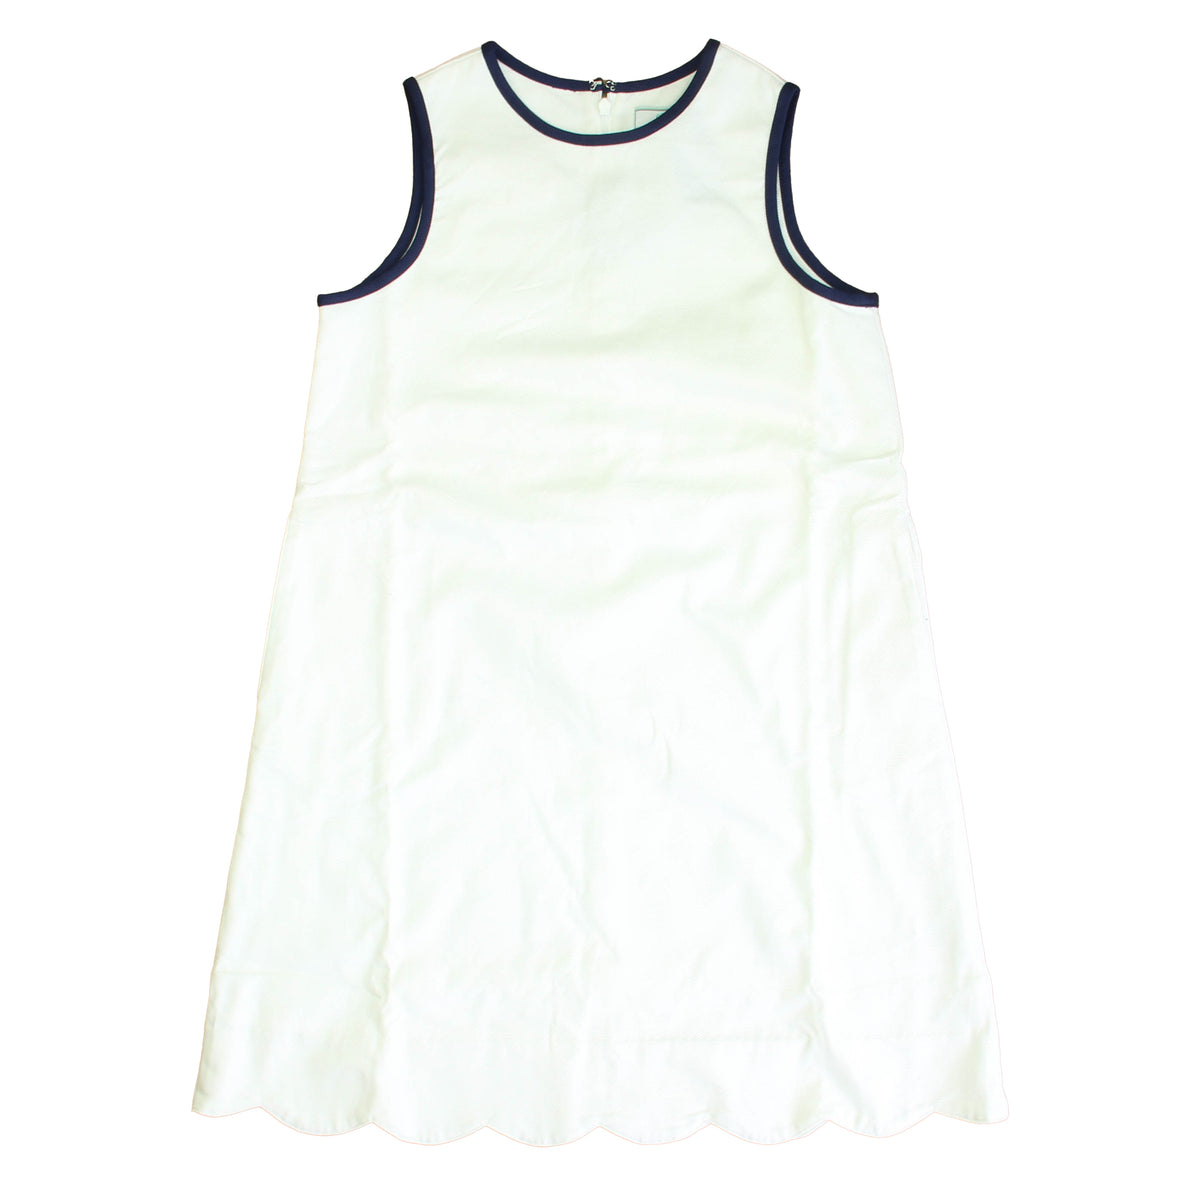 New with Tags: White | Navy Dress size: 6-14 Years -- FINAL SALE